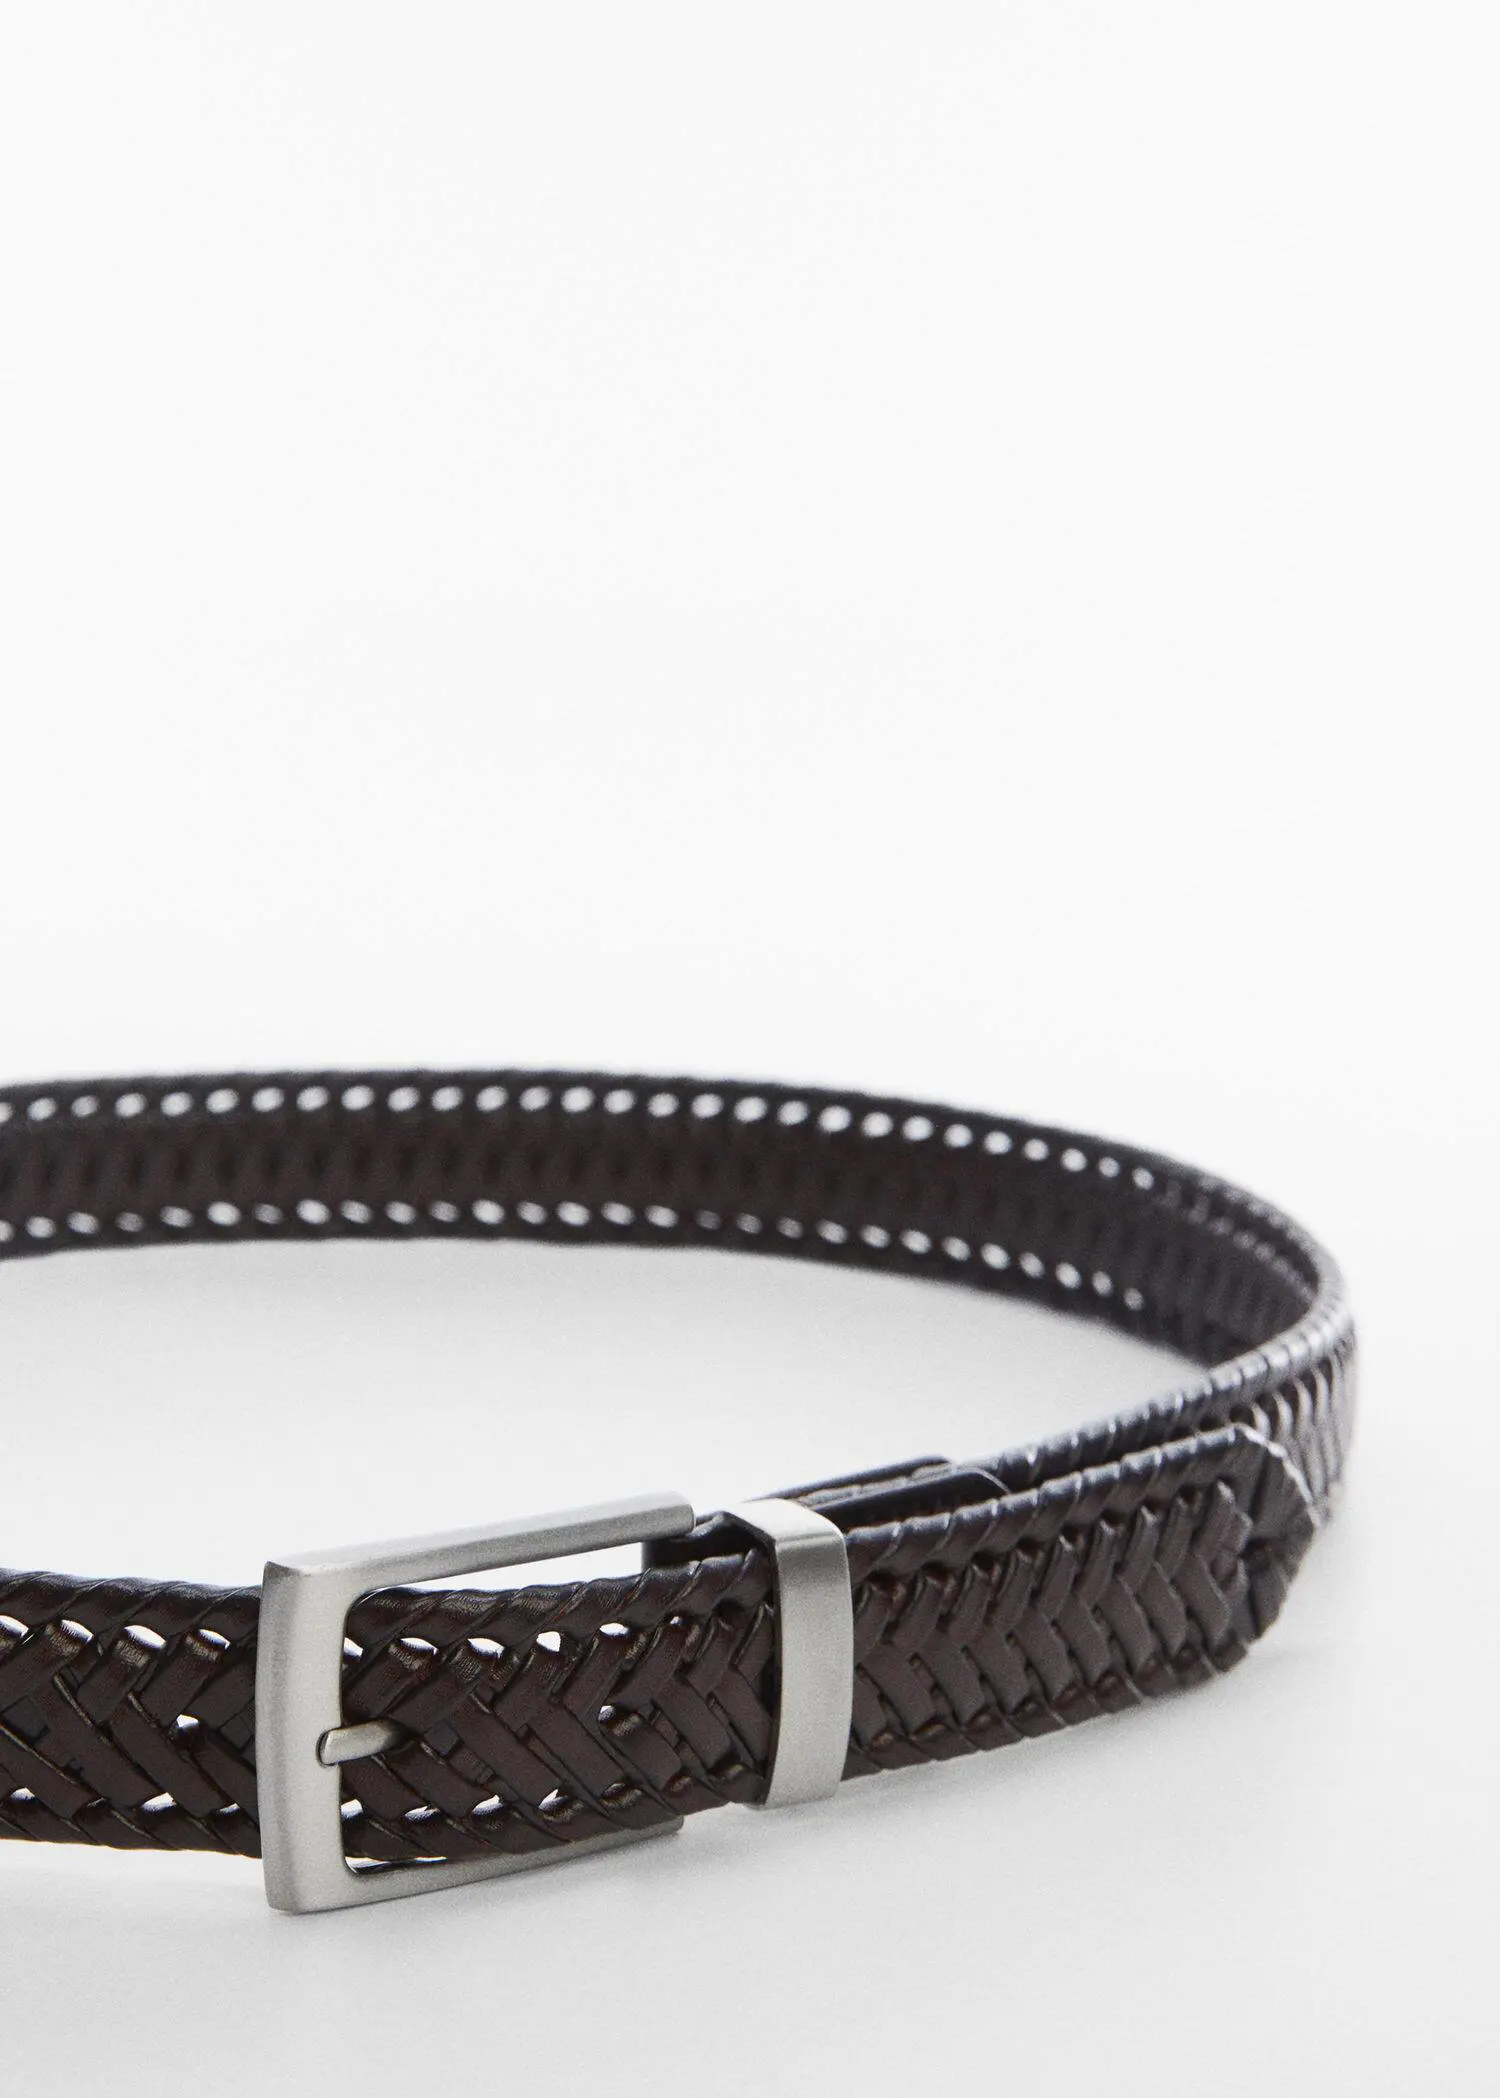 Mango Braided leather belt. a close-up of a brown leather belt with a silver buckle. 